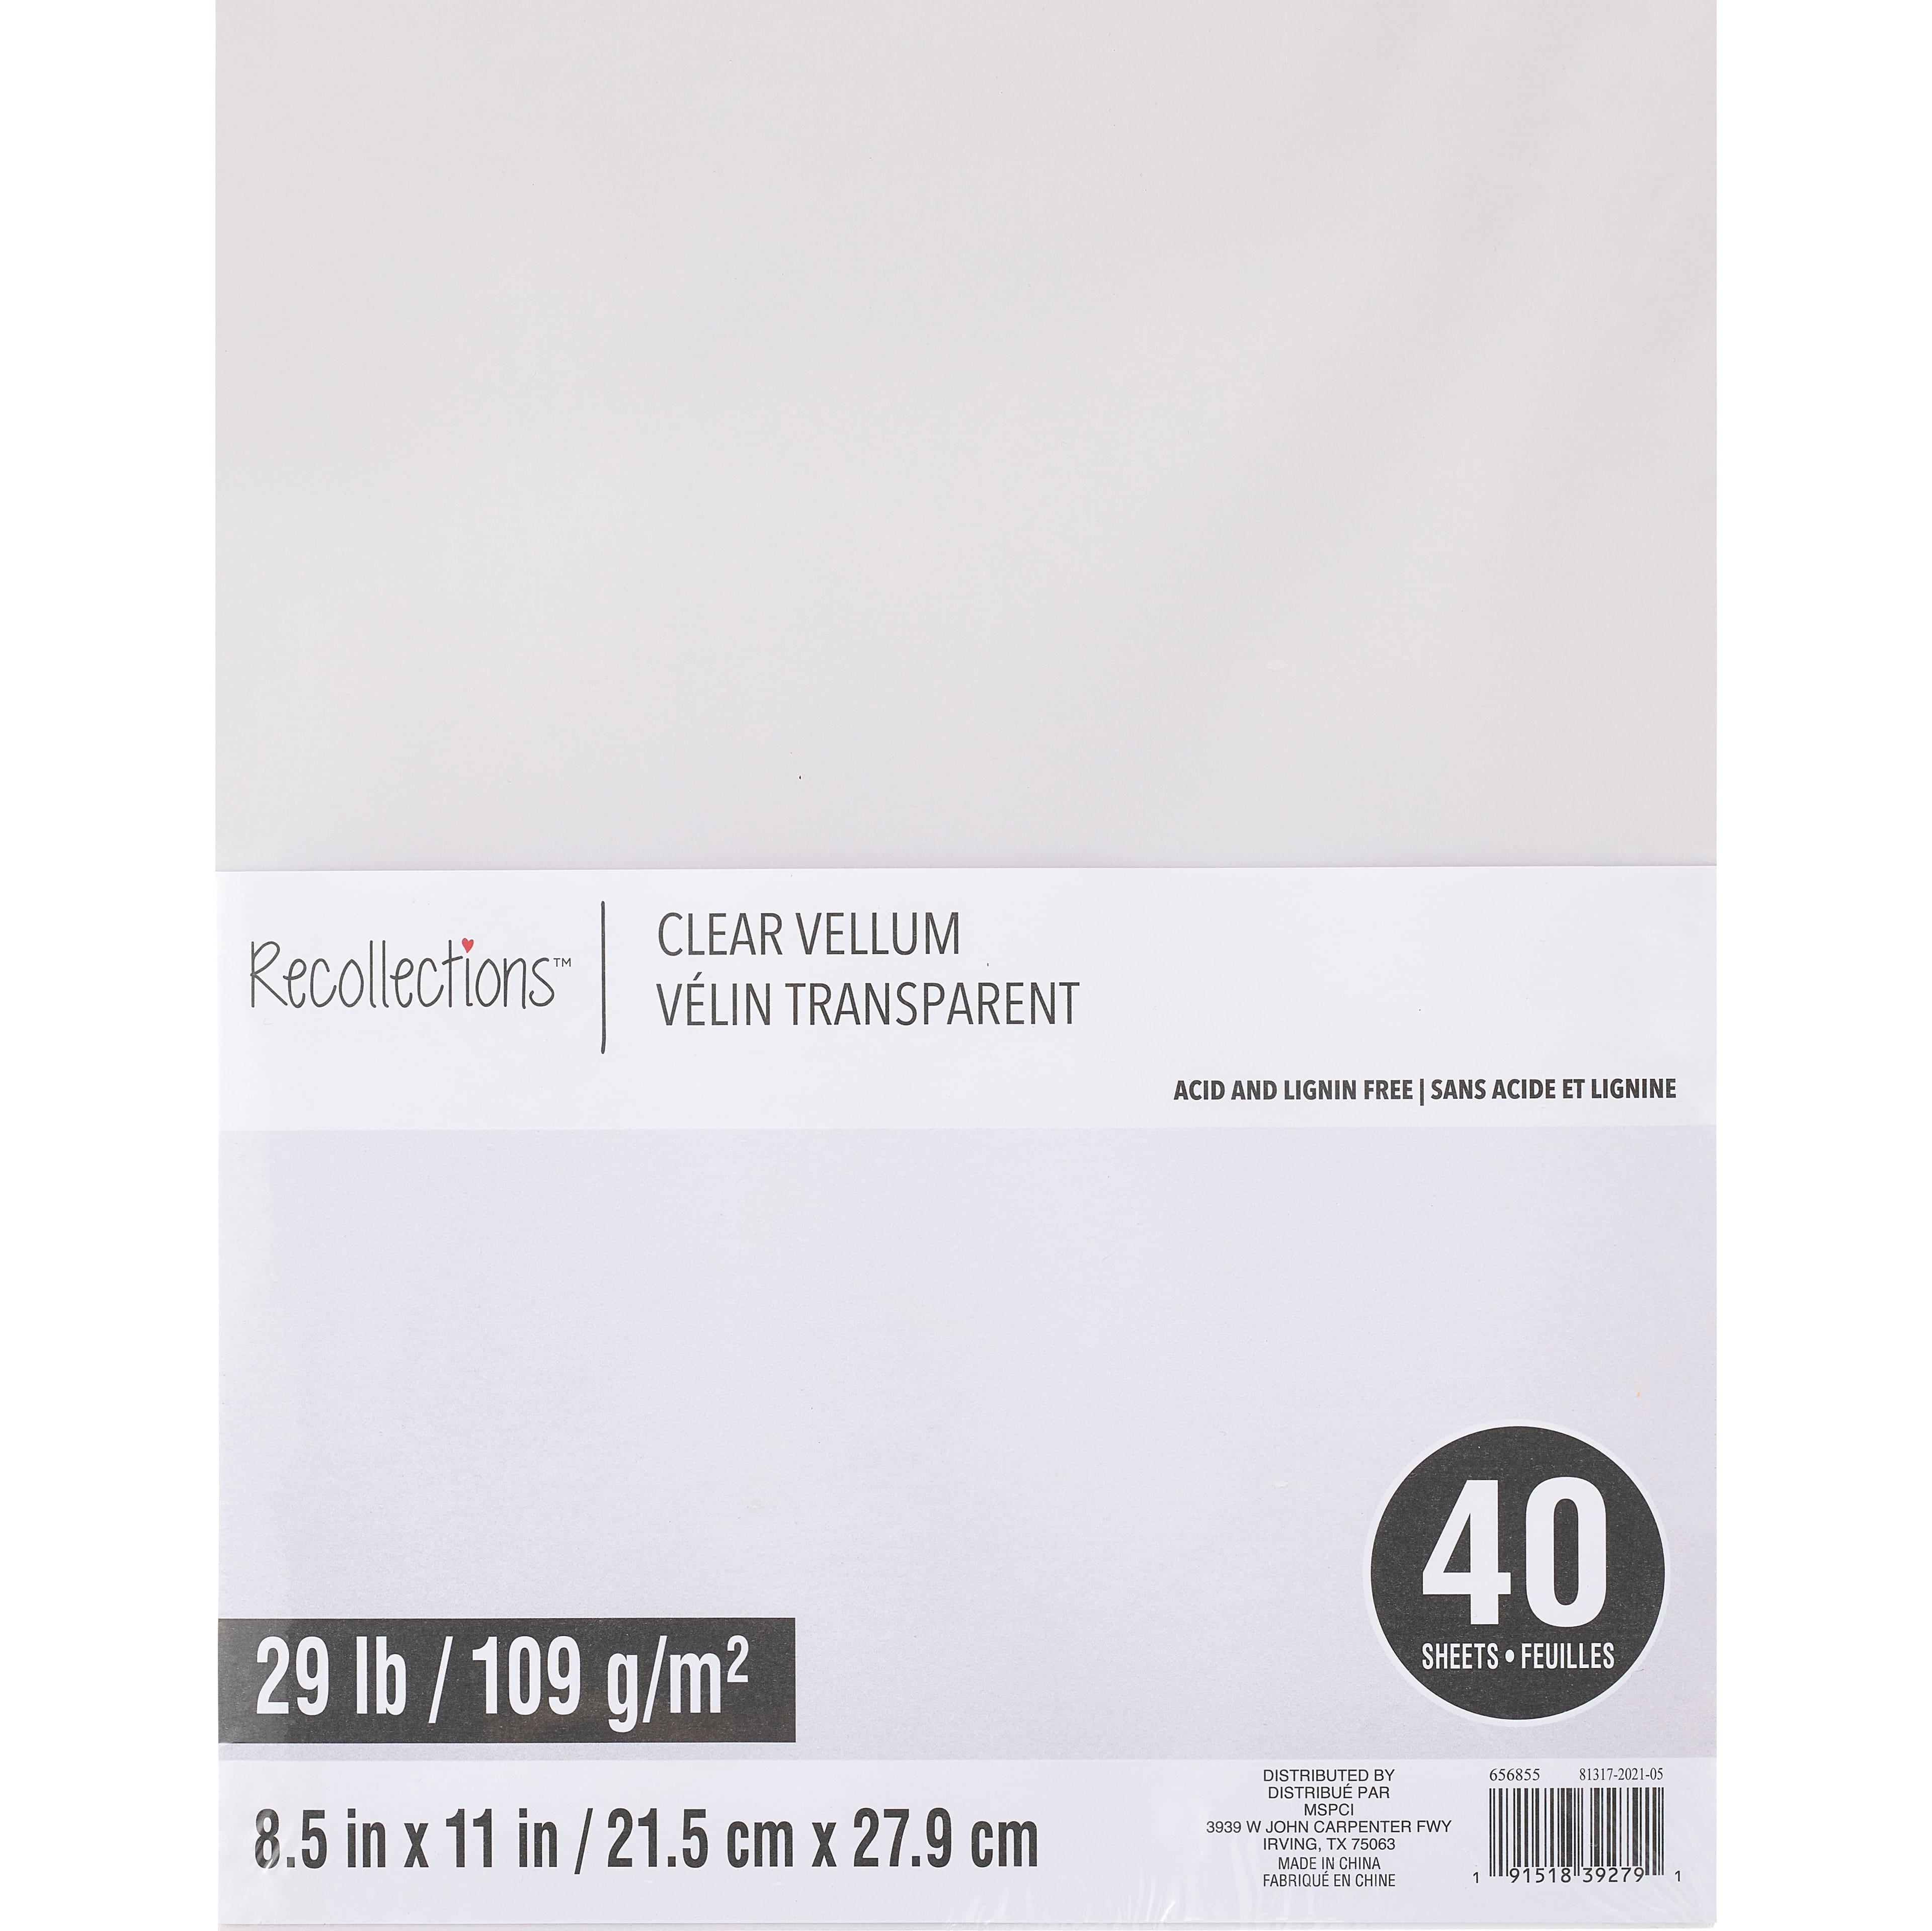  100 Sheets 8.5 x 11 in Translucent Vellum Paper - 93gsm/63lb  Printable Tracing Paper for Invitation, Sketching and Card Overlays